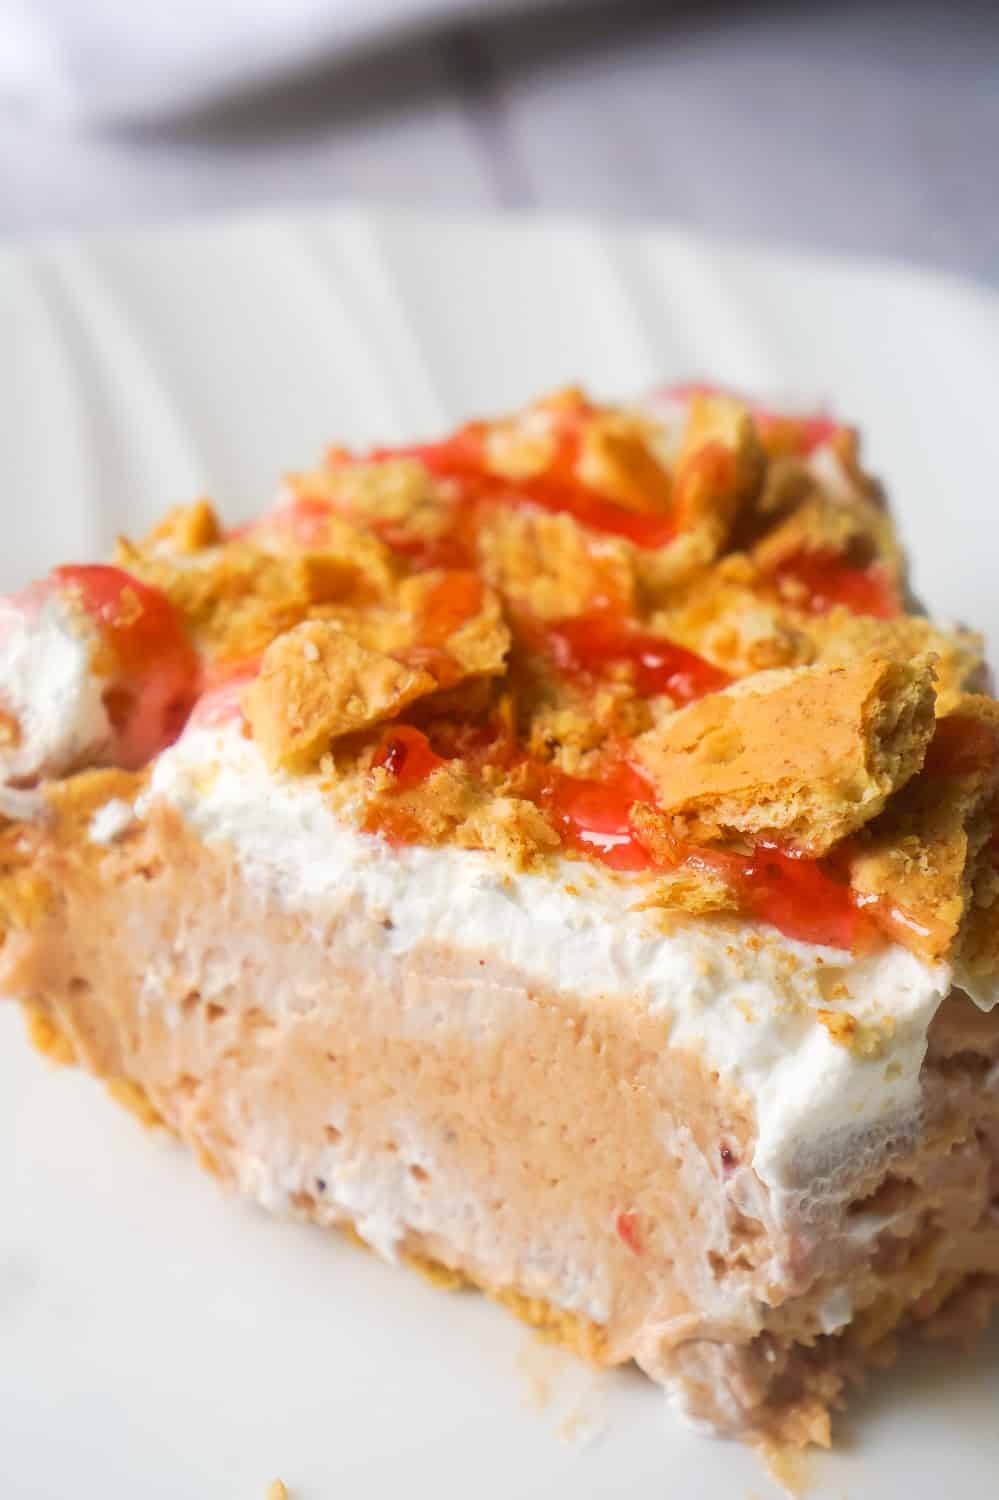 Peanut Butter and Jelly No Bake Cheesecake is an easy dessert recipe perfect for summer. The graham cracker crust is filled with a smooth and creamy PB & J filling that will remind you of the classic sandwich from your childhood.